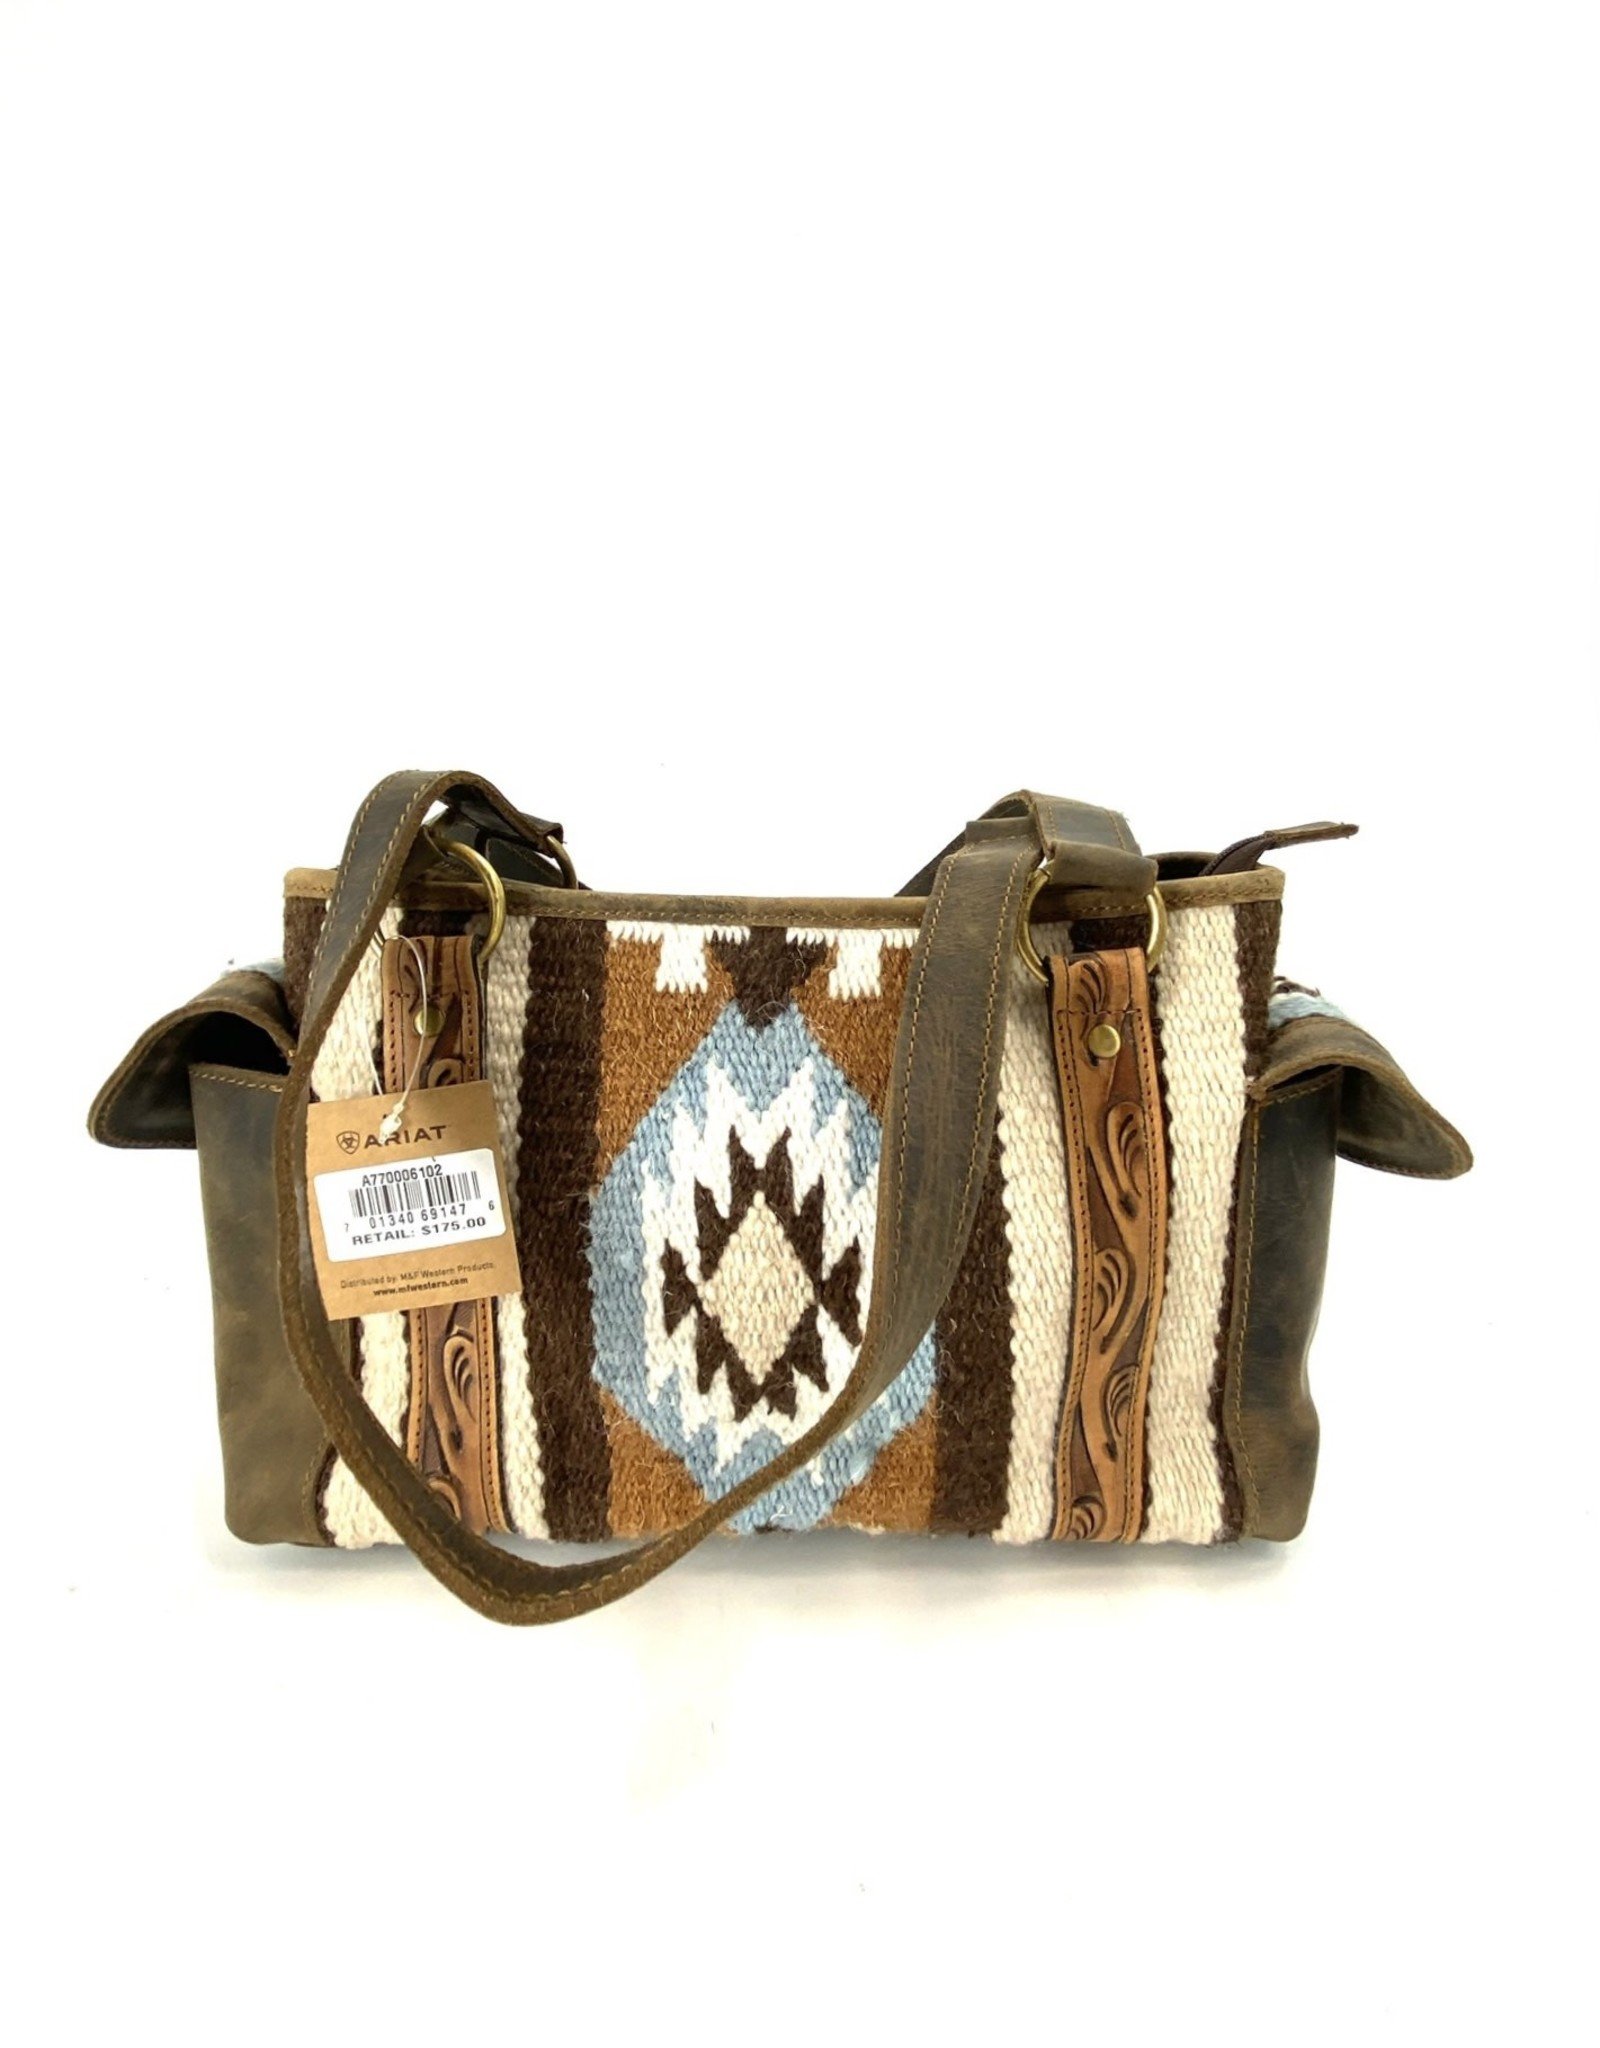 ARIAT PURSE HORSE BLANKET TOOLED LEATHER AZTEC BROWN/BLUE SATCHEL